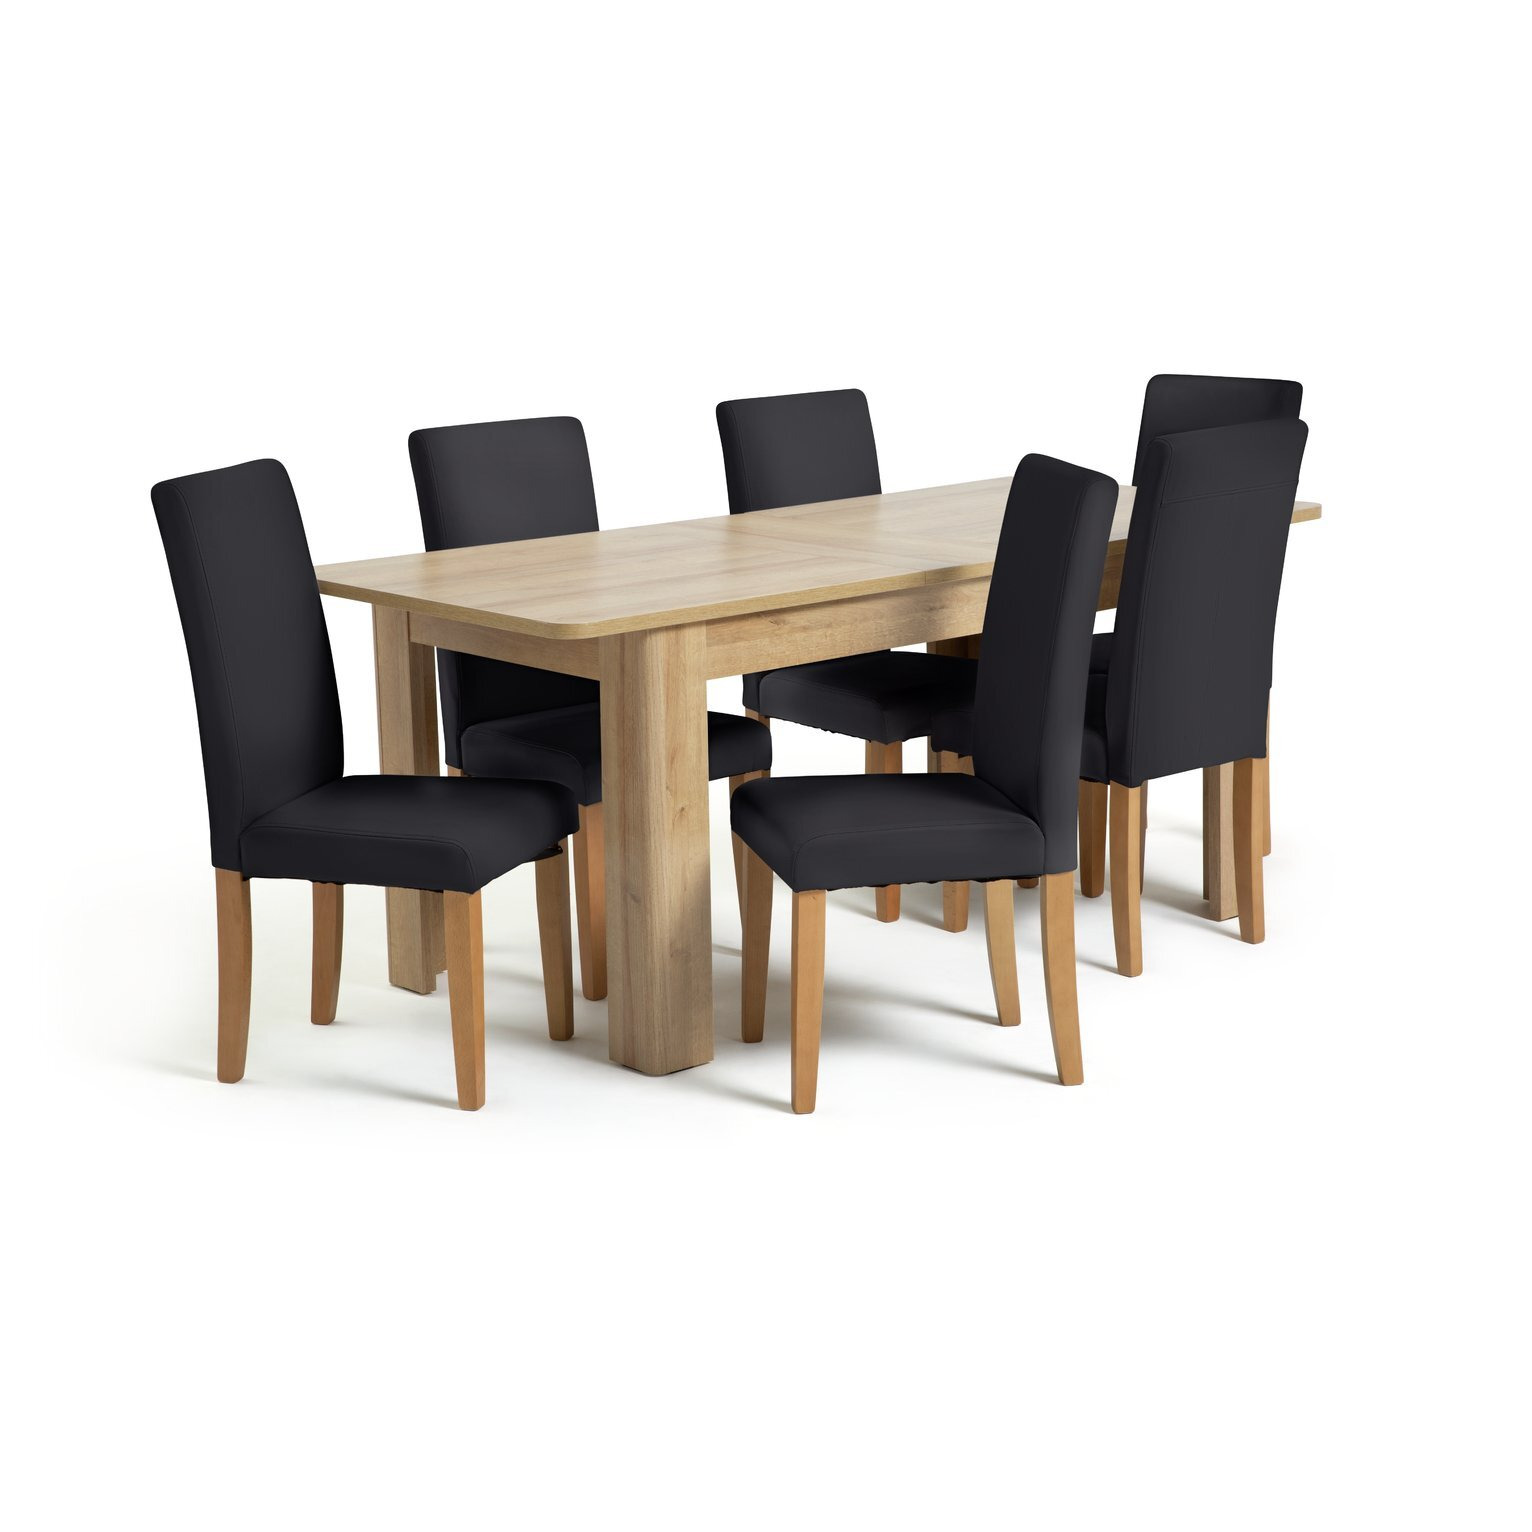 Argos Home Miami Curve Extending Table & 6 Black Chairs - image 1